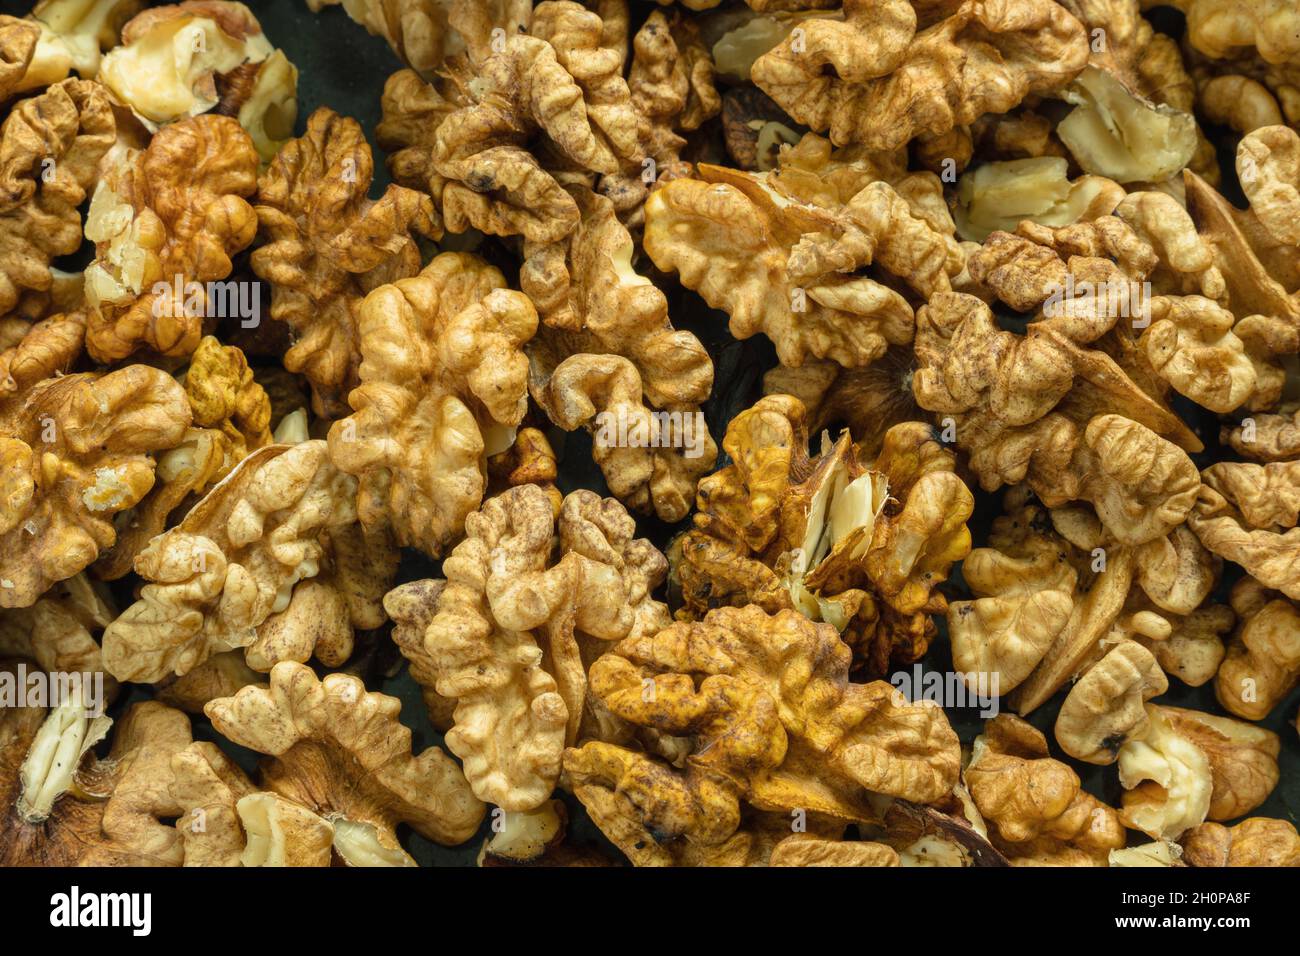 Top view of the halves of peeled walnuts. Close-up. Background image Stock Photo